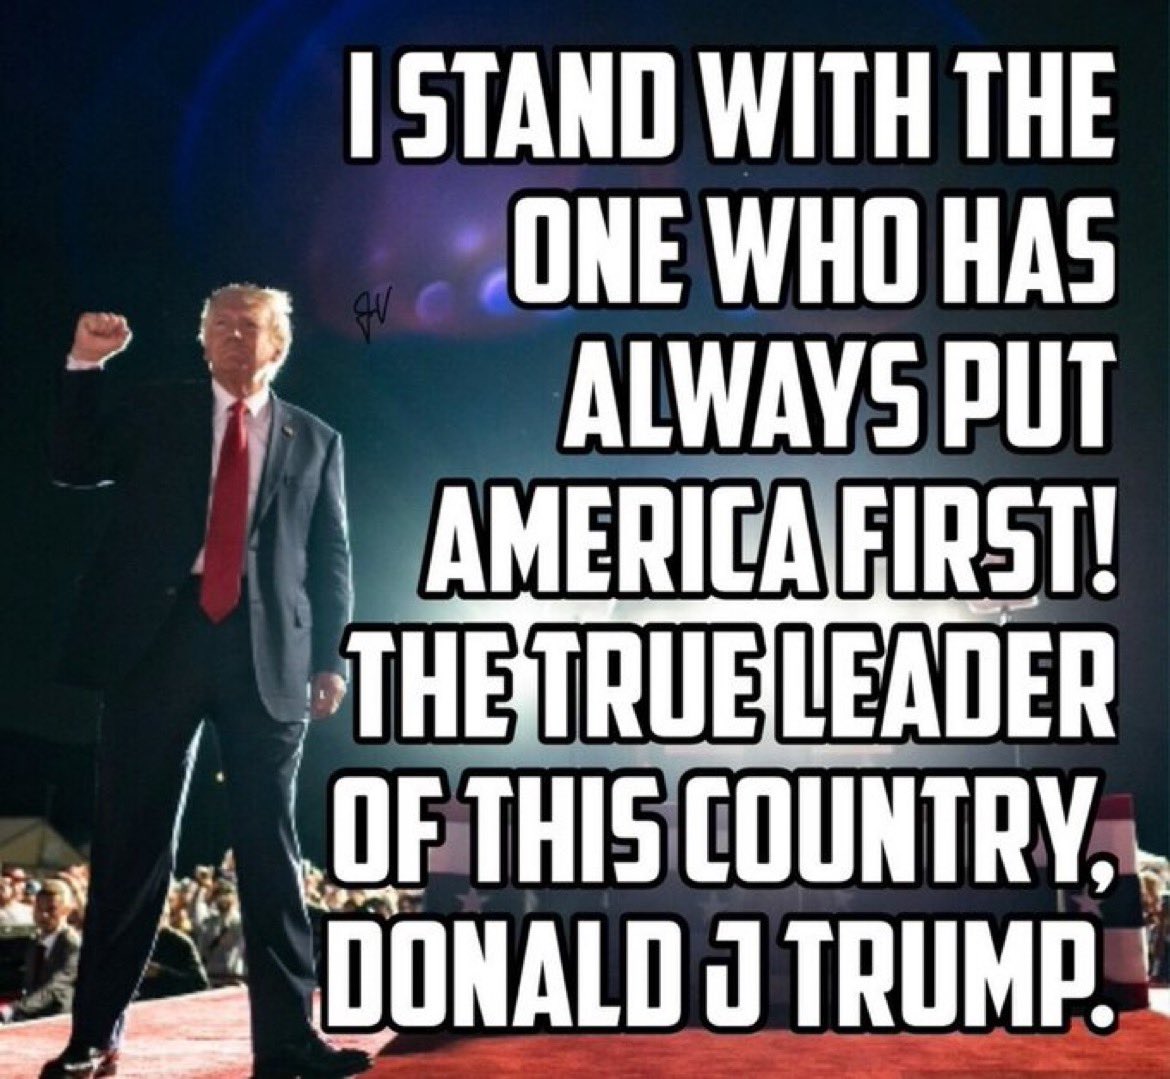 I stand with President Trump. #Trump2024 #MAGA2024 #AmericaFirst 🇺🇸🇺🇸🇺🇸